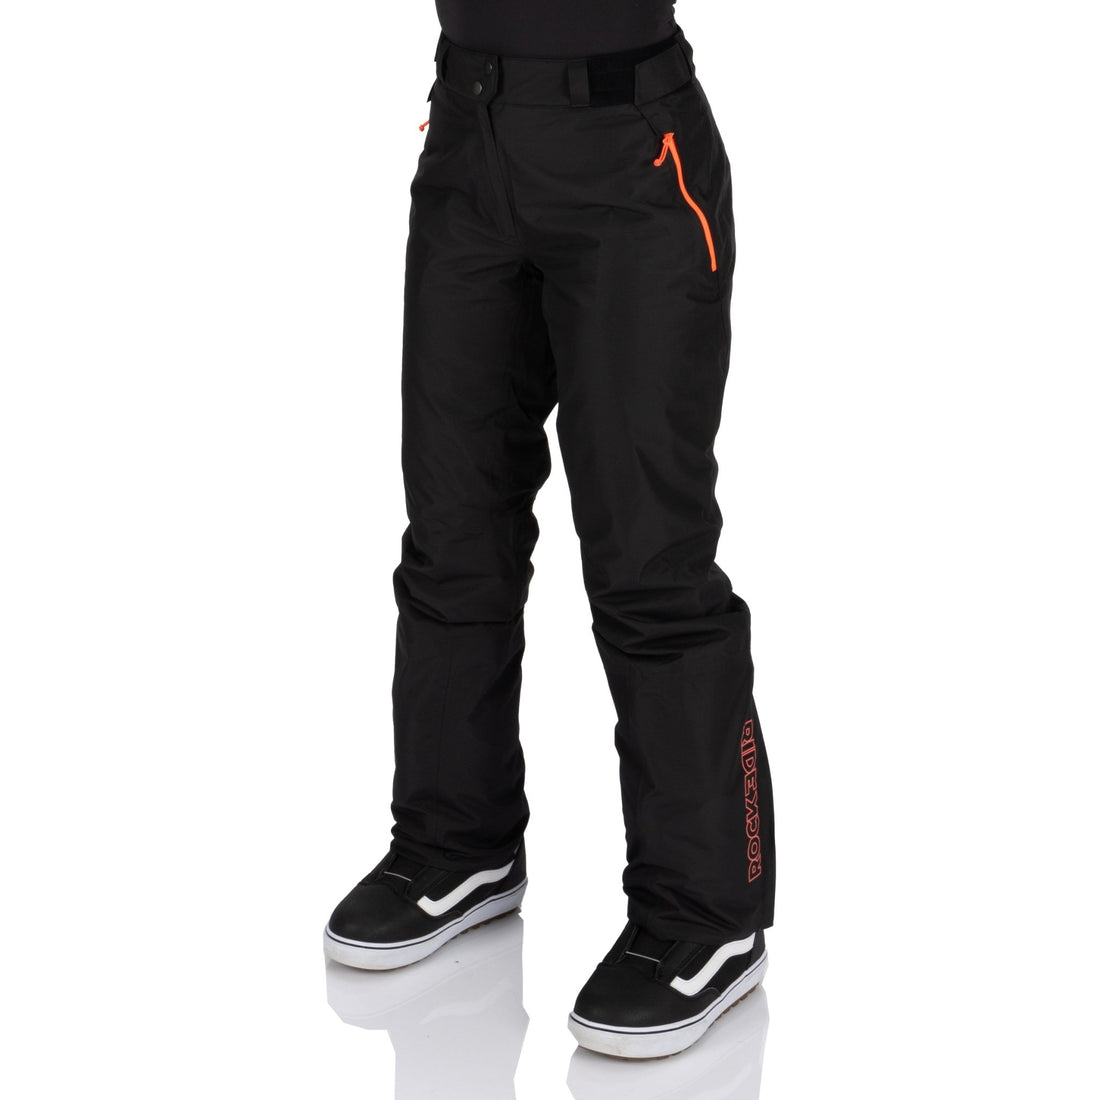 Rock Experience - NORTH POLE PADDED - Women Pant - World of Alps